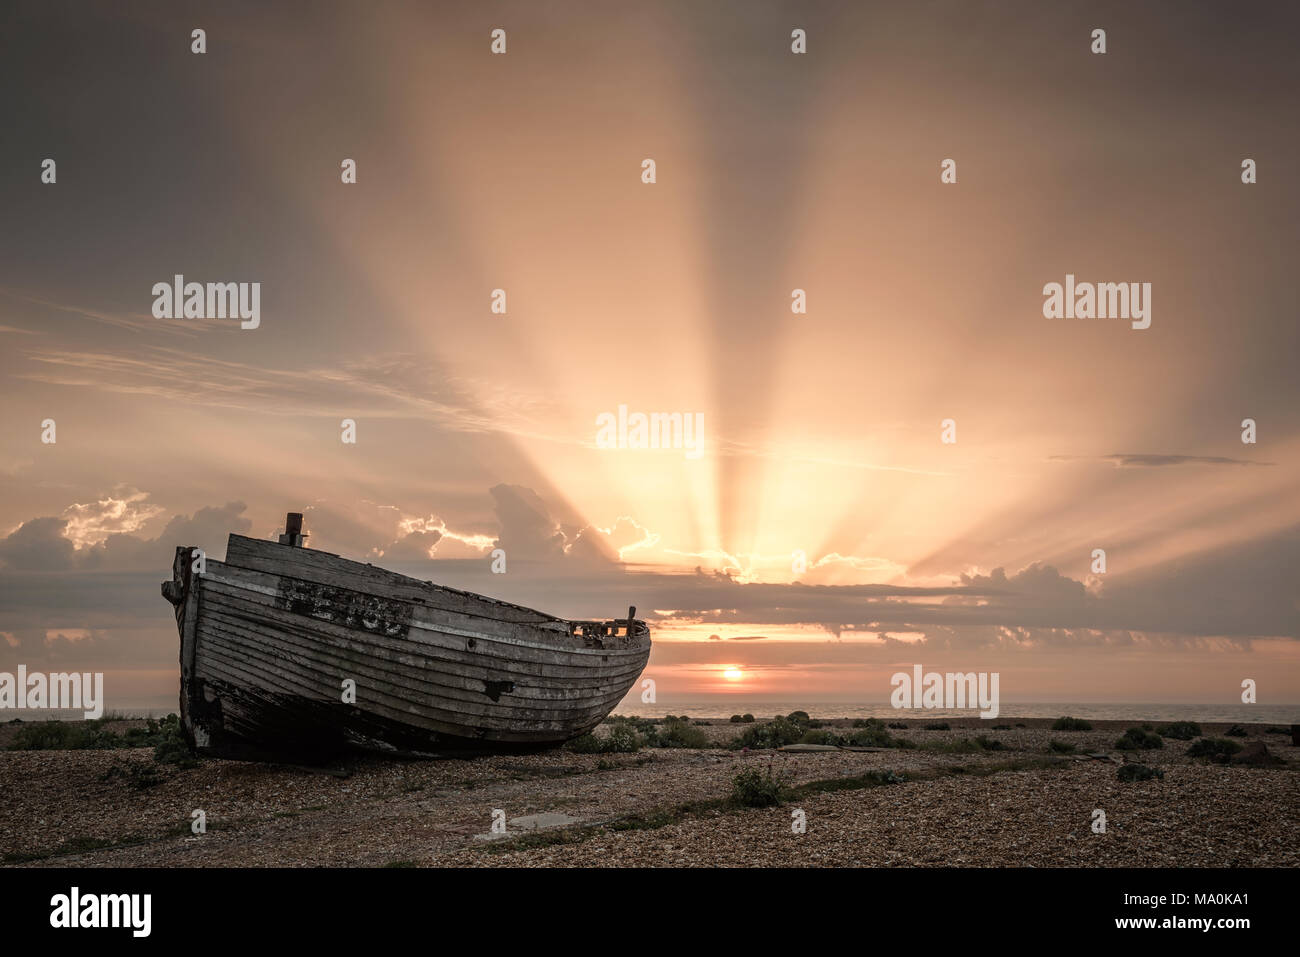 As the sun rises above the horizon at Dungeness in Kent the sky is filled with a beautiful sunburst, a fitting background to one of the many abandoned Stock Photo